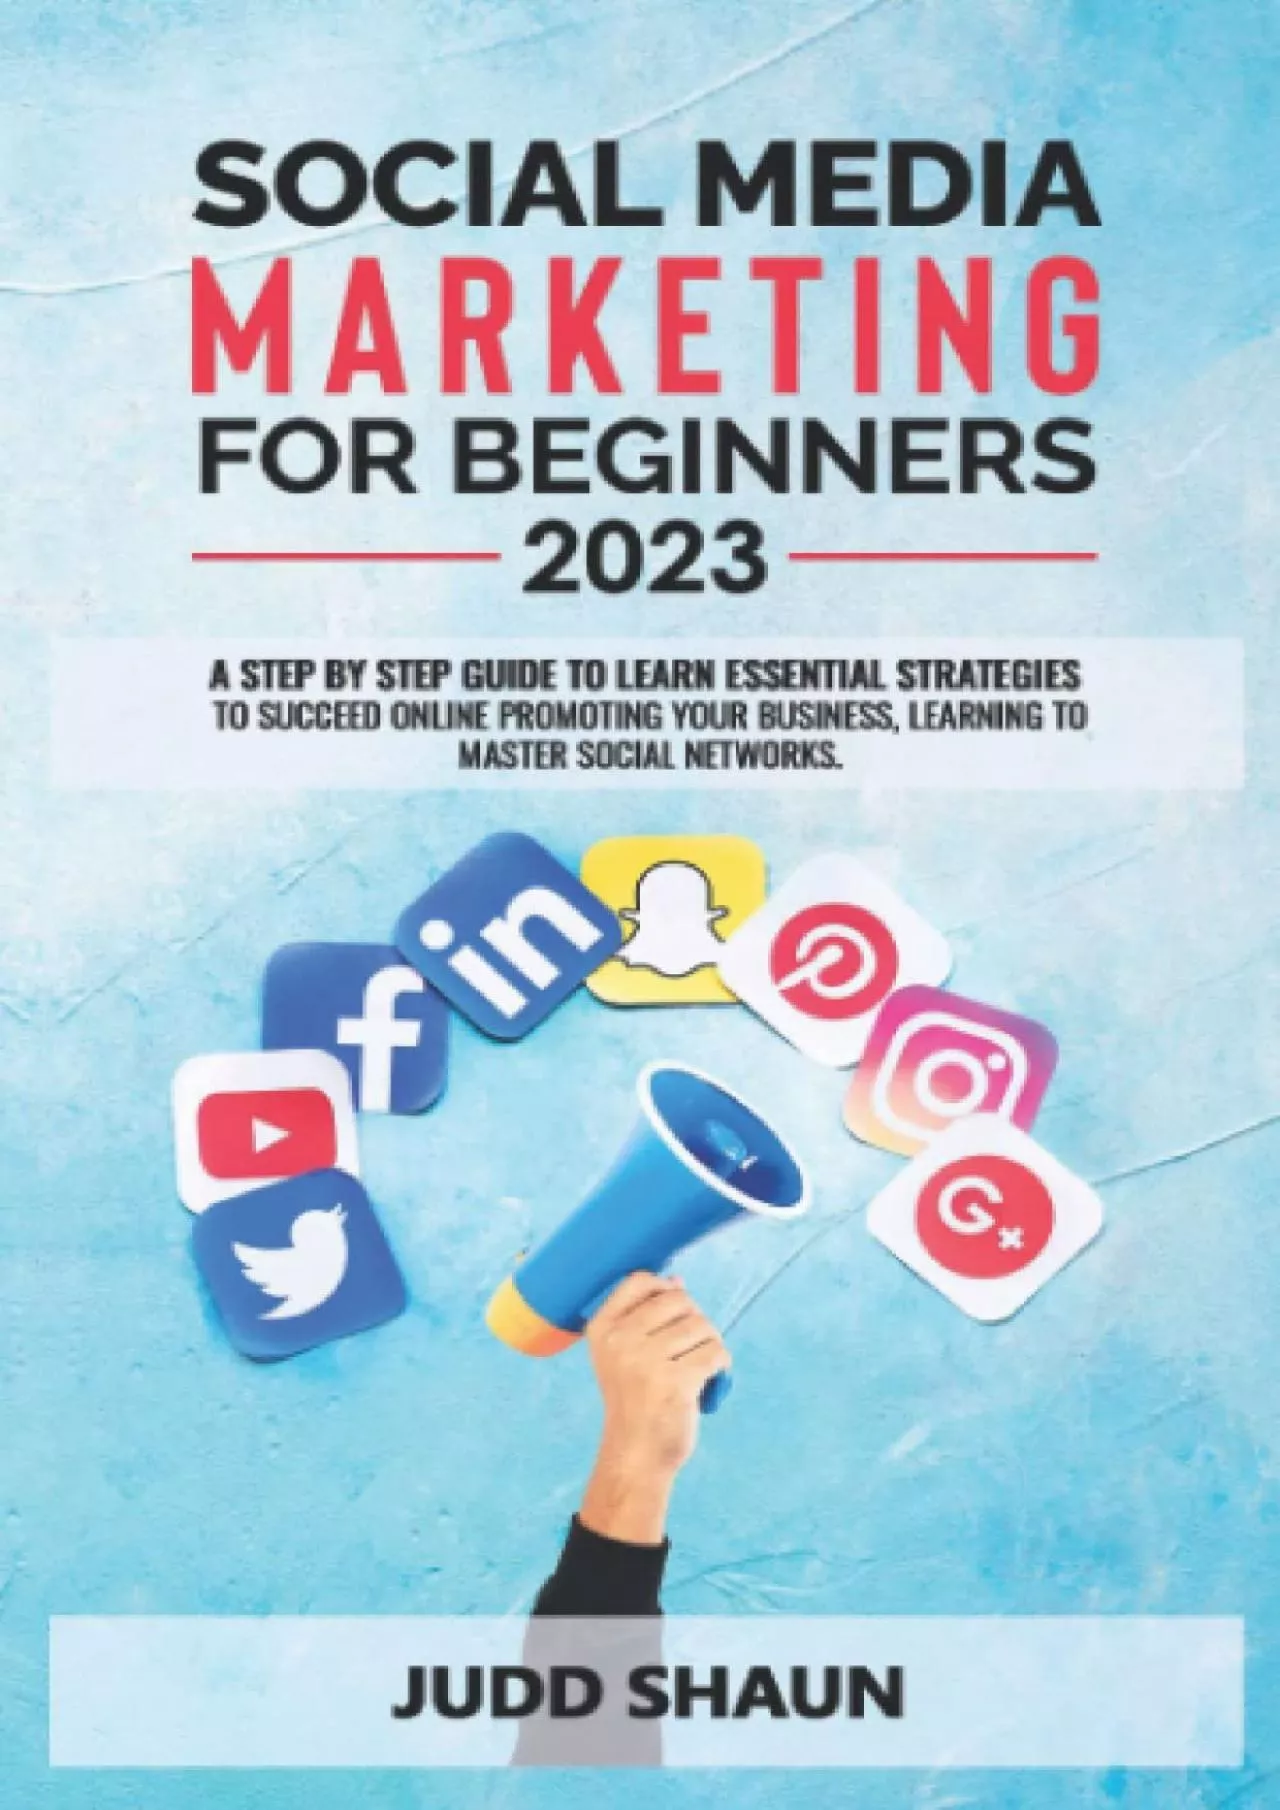 Social Media Marketing for Beginners: A step-by-step guide to learn essential strategies